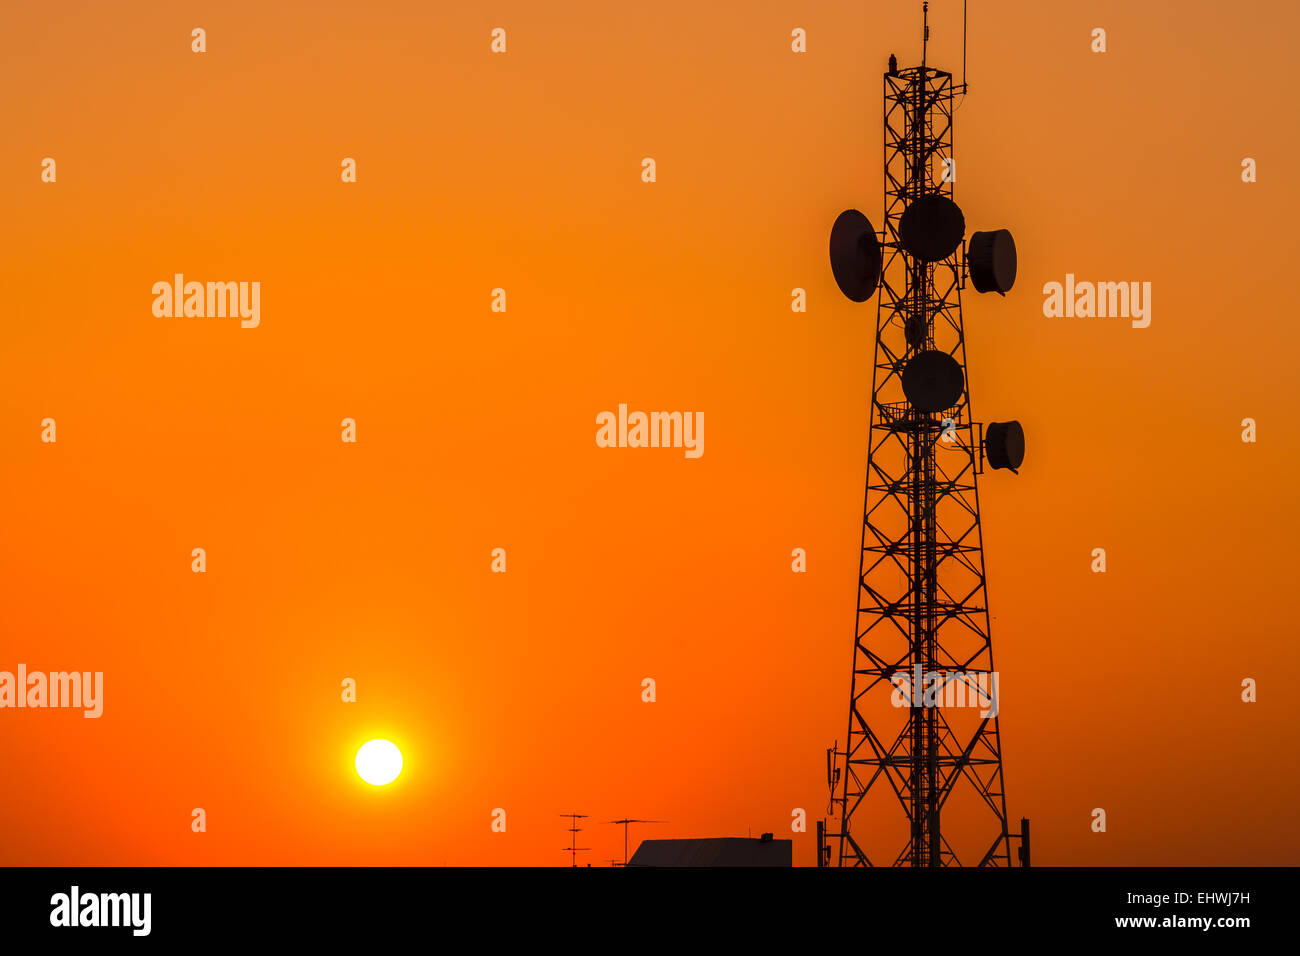 Telecommunication tower structure with sunset sky in silhouette background Stock Photo